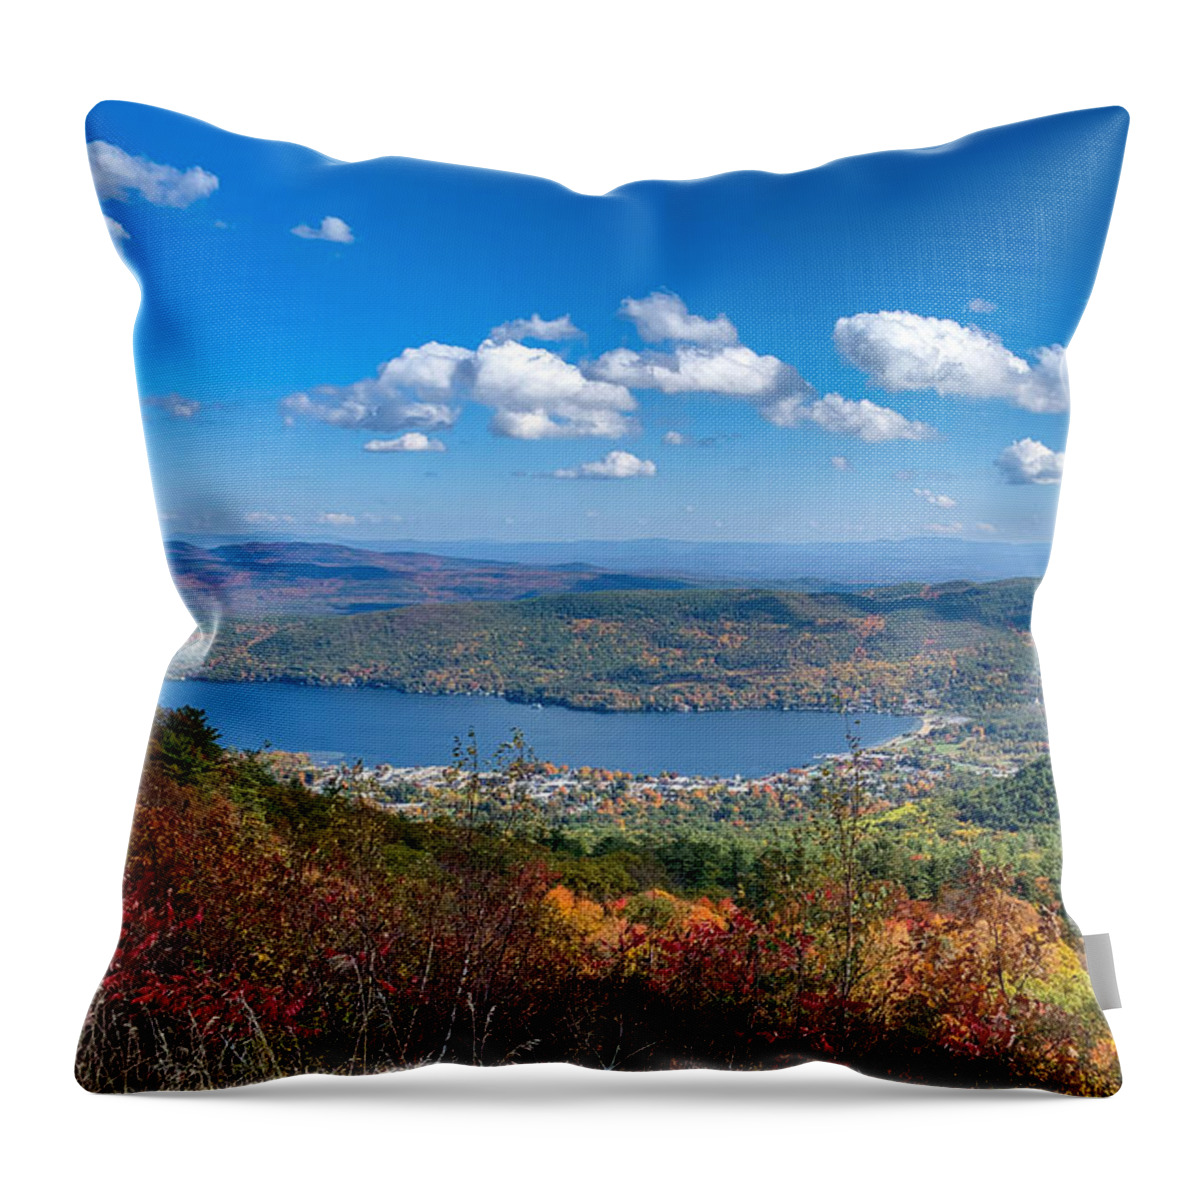  Throw Pillow featuring the photograph Lake George Village view by Kendall McKernon